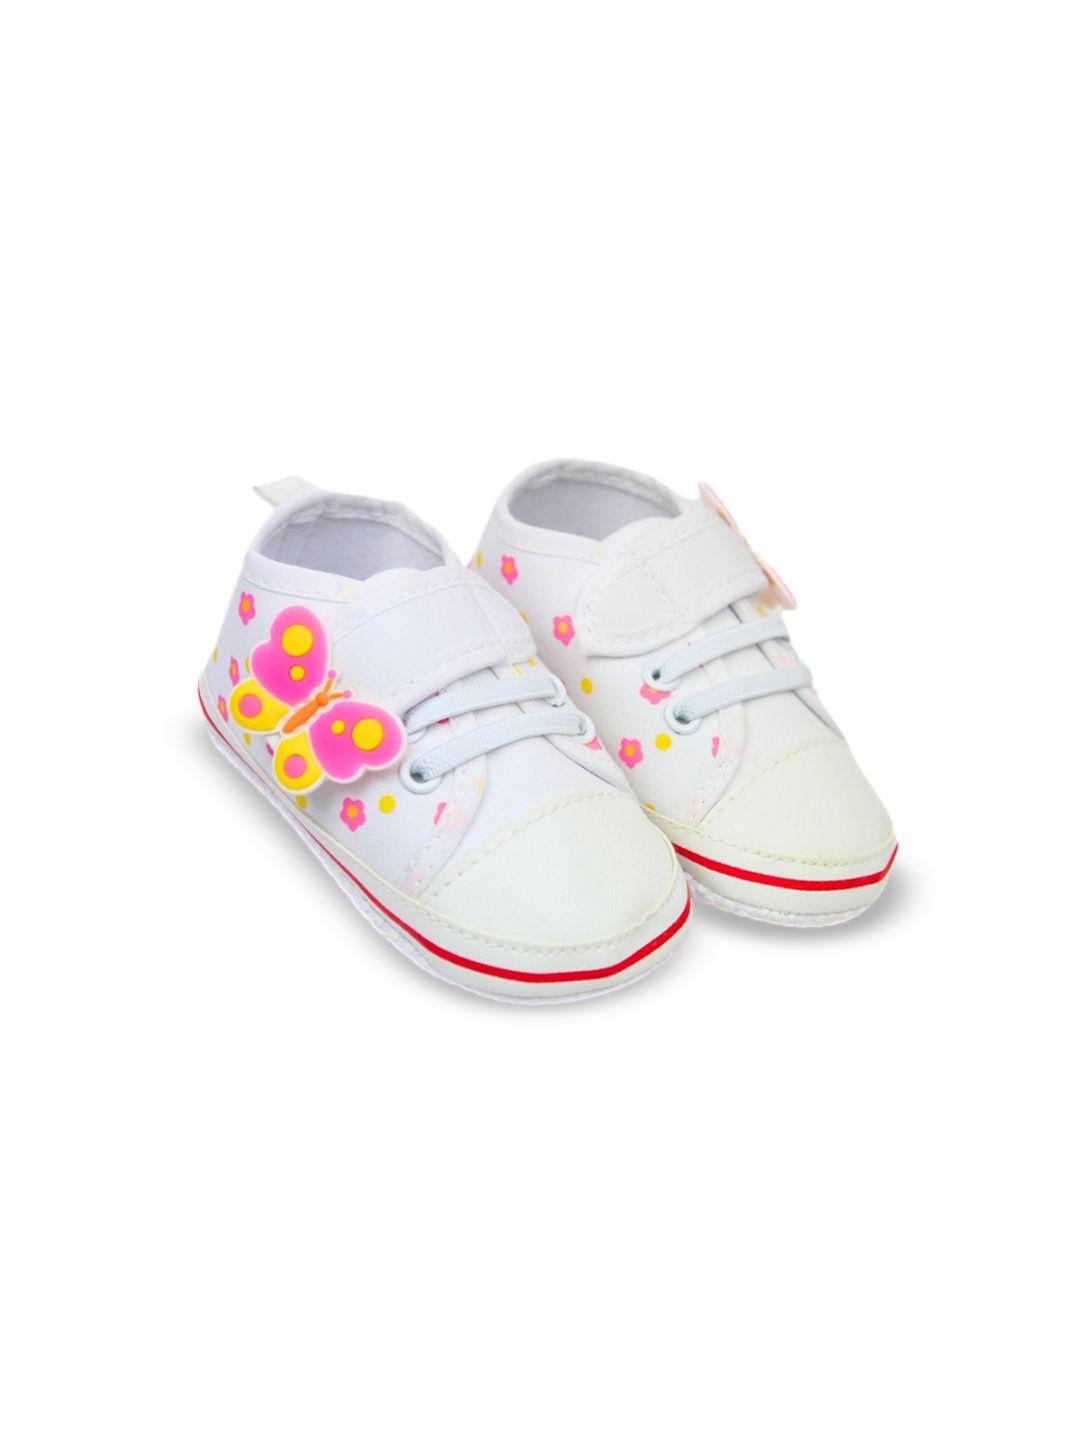 baesd infant girls butterfly detail cotton booties